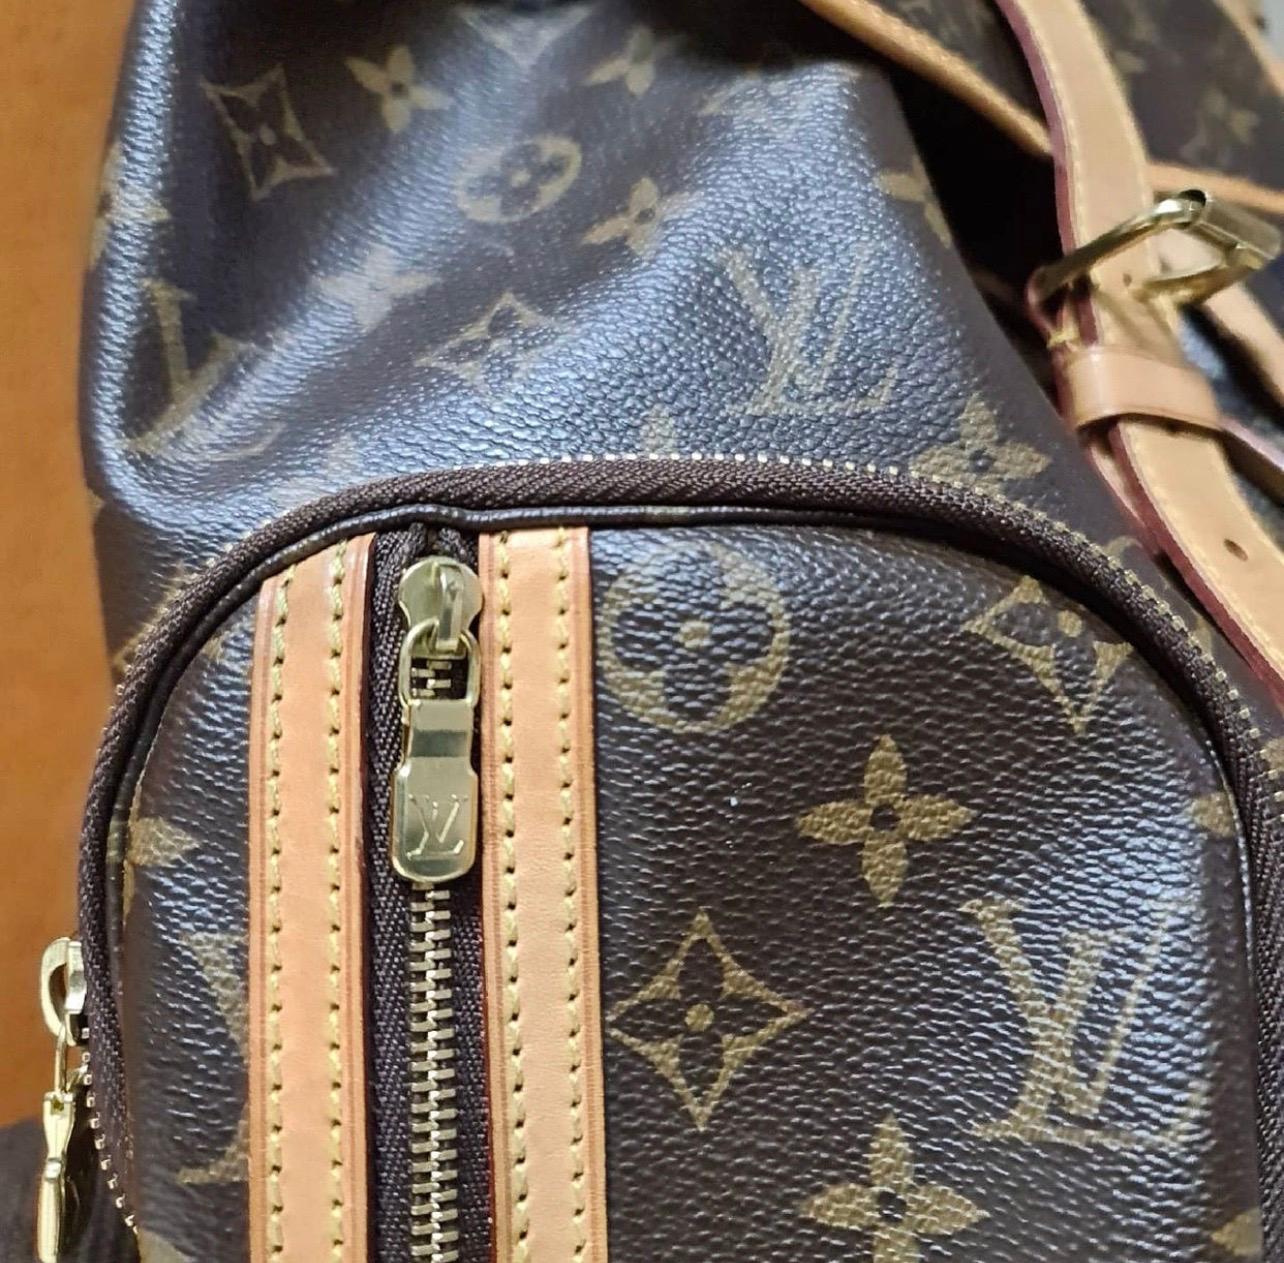 This striking Louis Vuitton Monogram Canvas Sac a Dos Bosphore Backpack Bag is great for ultimate hands-free convenience. 
The size and multiple pockets and ultra spacious interior makes it perfect for carrying all of your essentials in style and